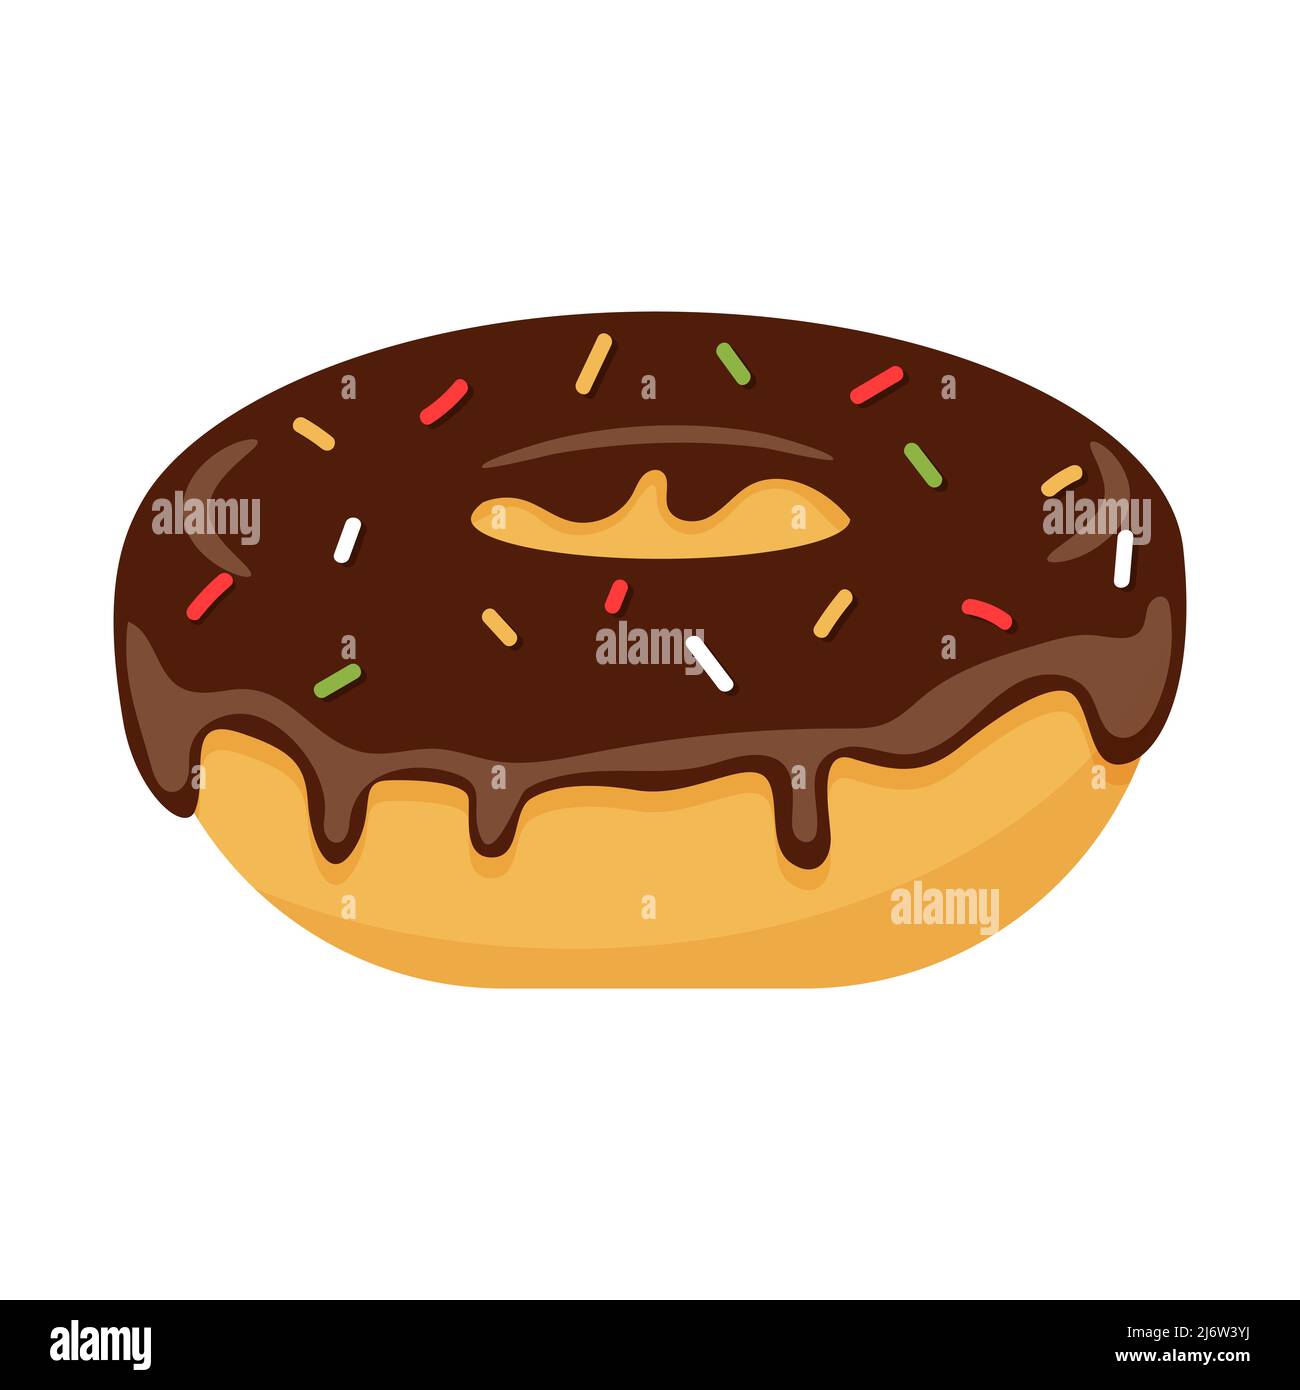 Donut with chocolate icing and decorative sprinkles. Sweet, fatty, high-calorie, unhealthy food, dessert, treat. Color vector illustration in cartoon Stock Vector